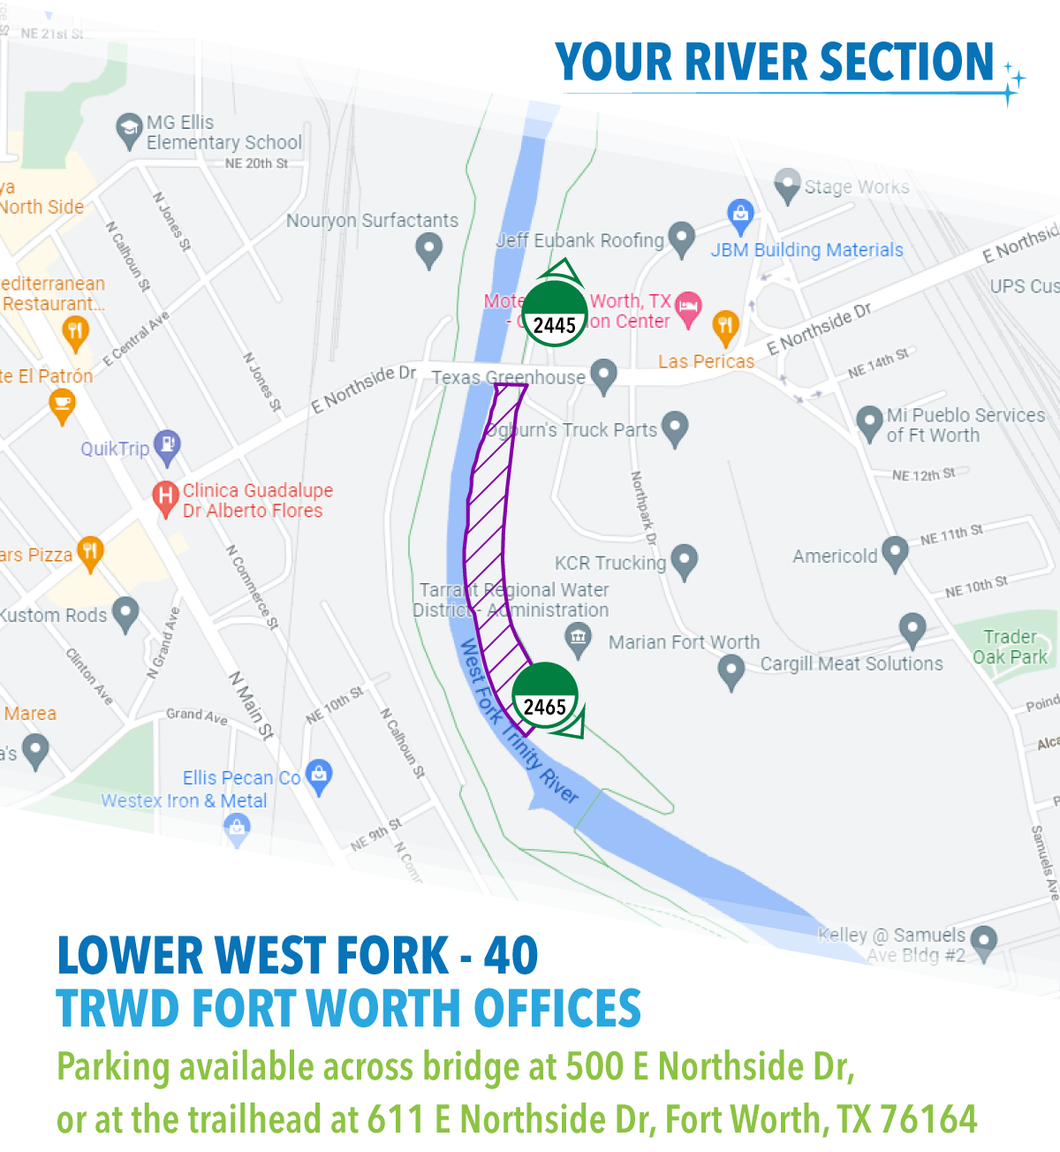 Section 40 – TRWD Fort Worth Offices